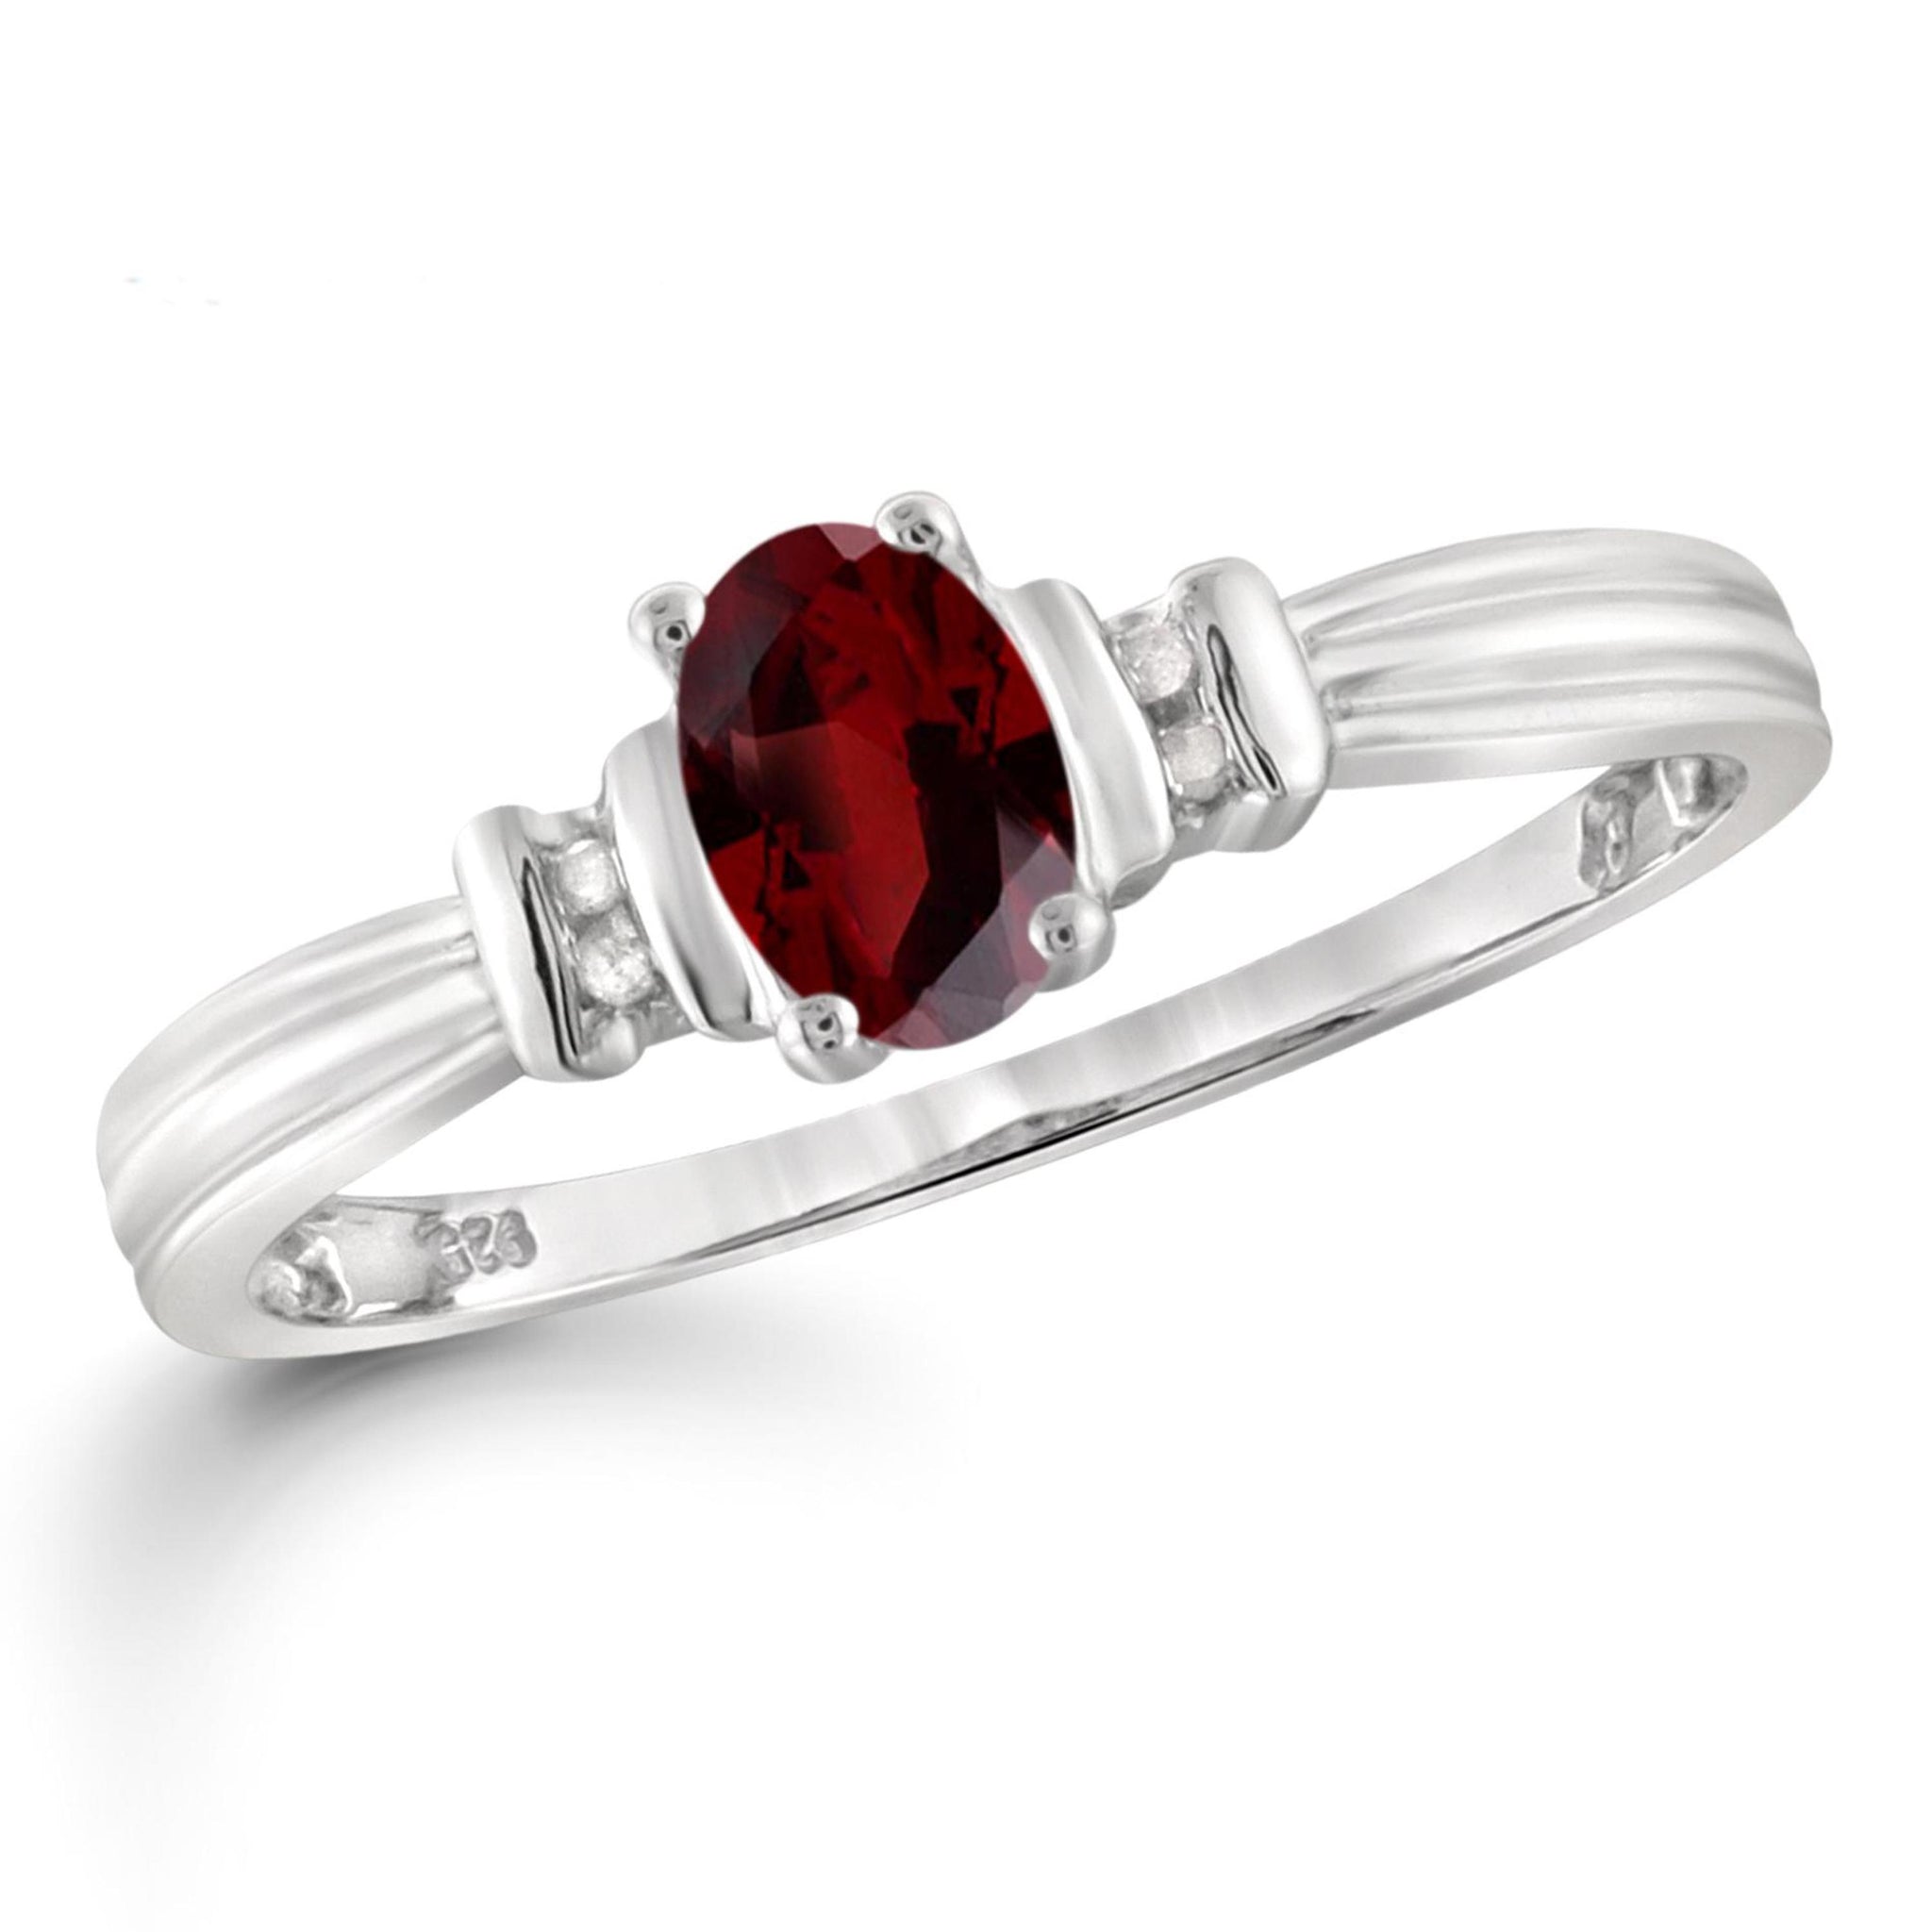 JewelonFire 1.00 Carat T.G.W. Garnet And 1/20 Carat T.W. White Diamond Sterling Silver Ring - Assorted Colors